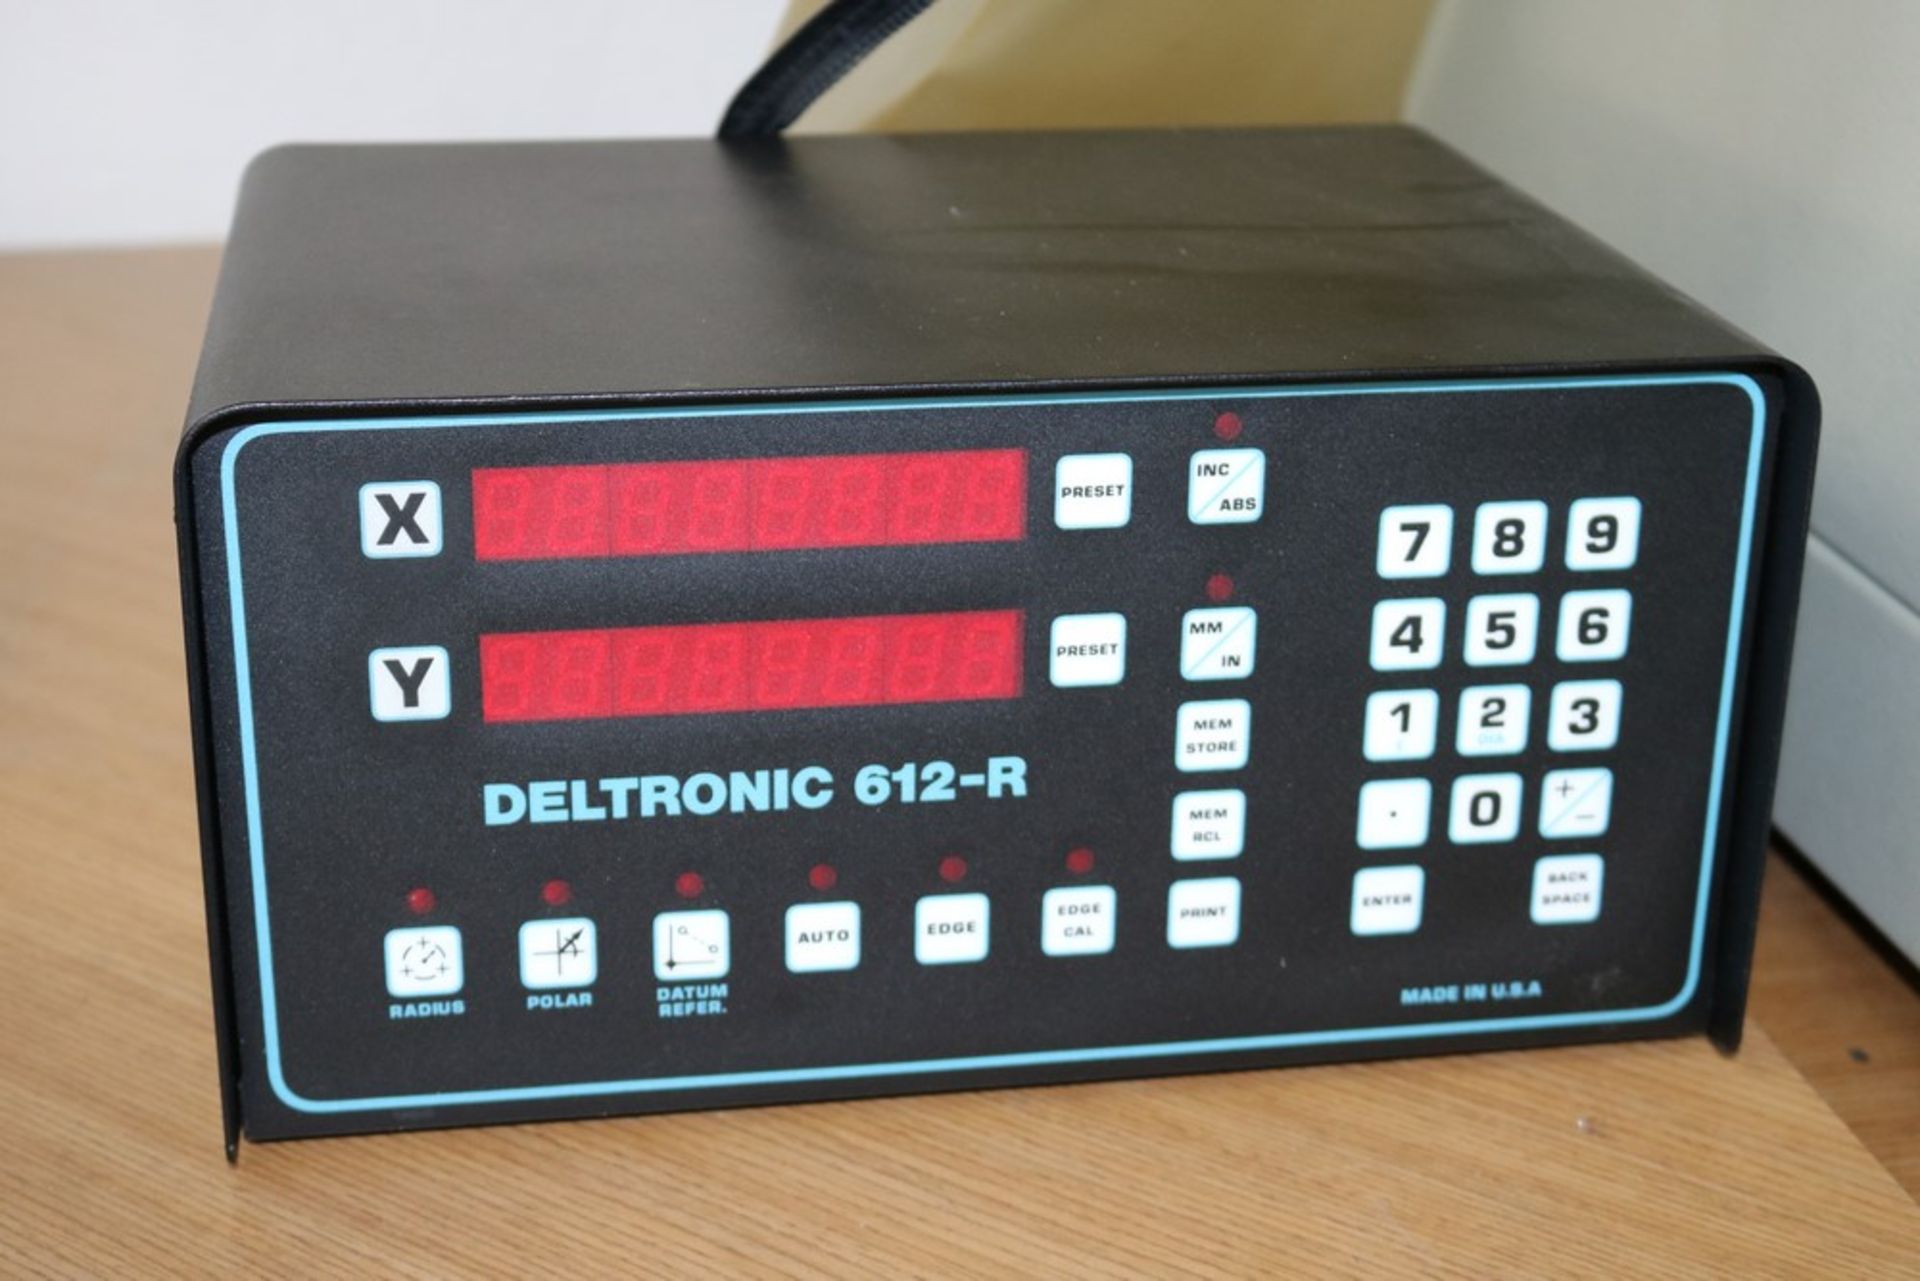 Deltronic DH214 Optical Comparitor with Deltronic 612-R DRO Includes Inspection Accessories - Image 9 of 9